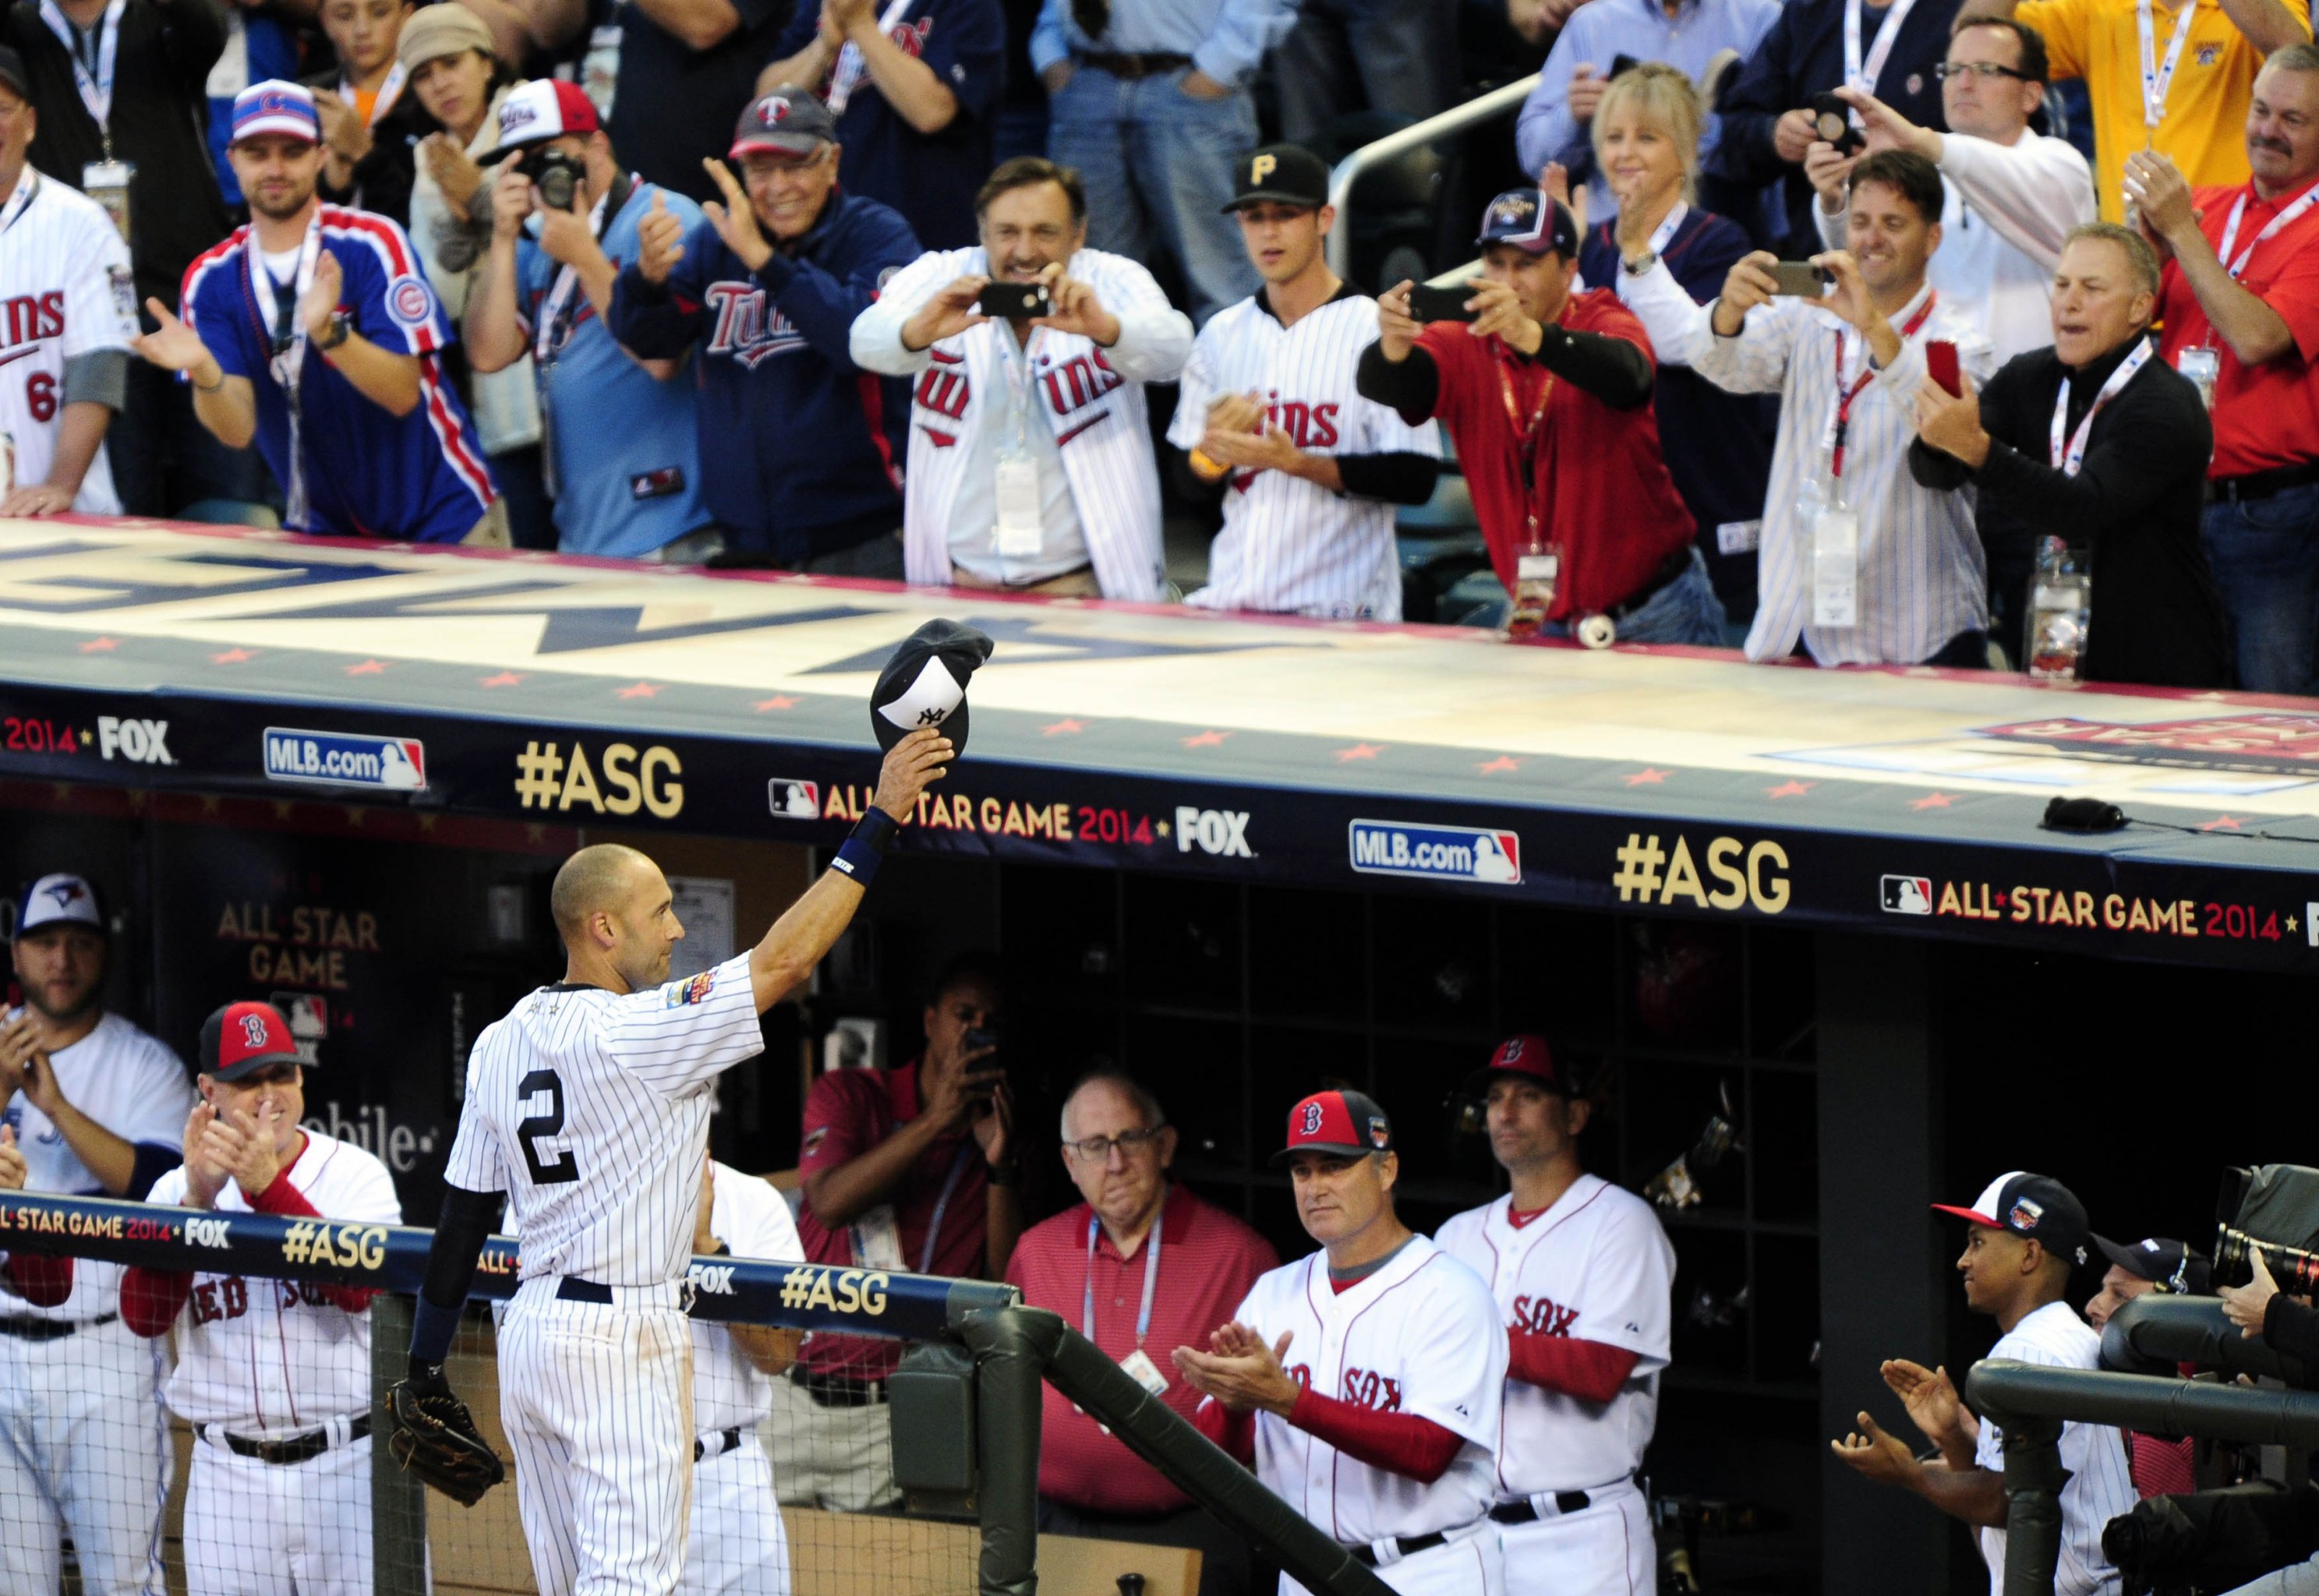 Derek Jeter stars, takes a bow in leading AL to All-Star Game